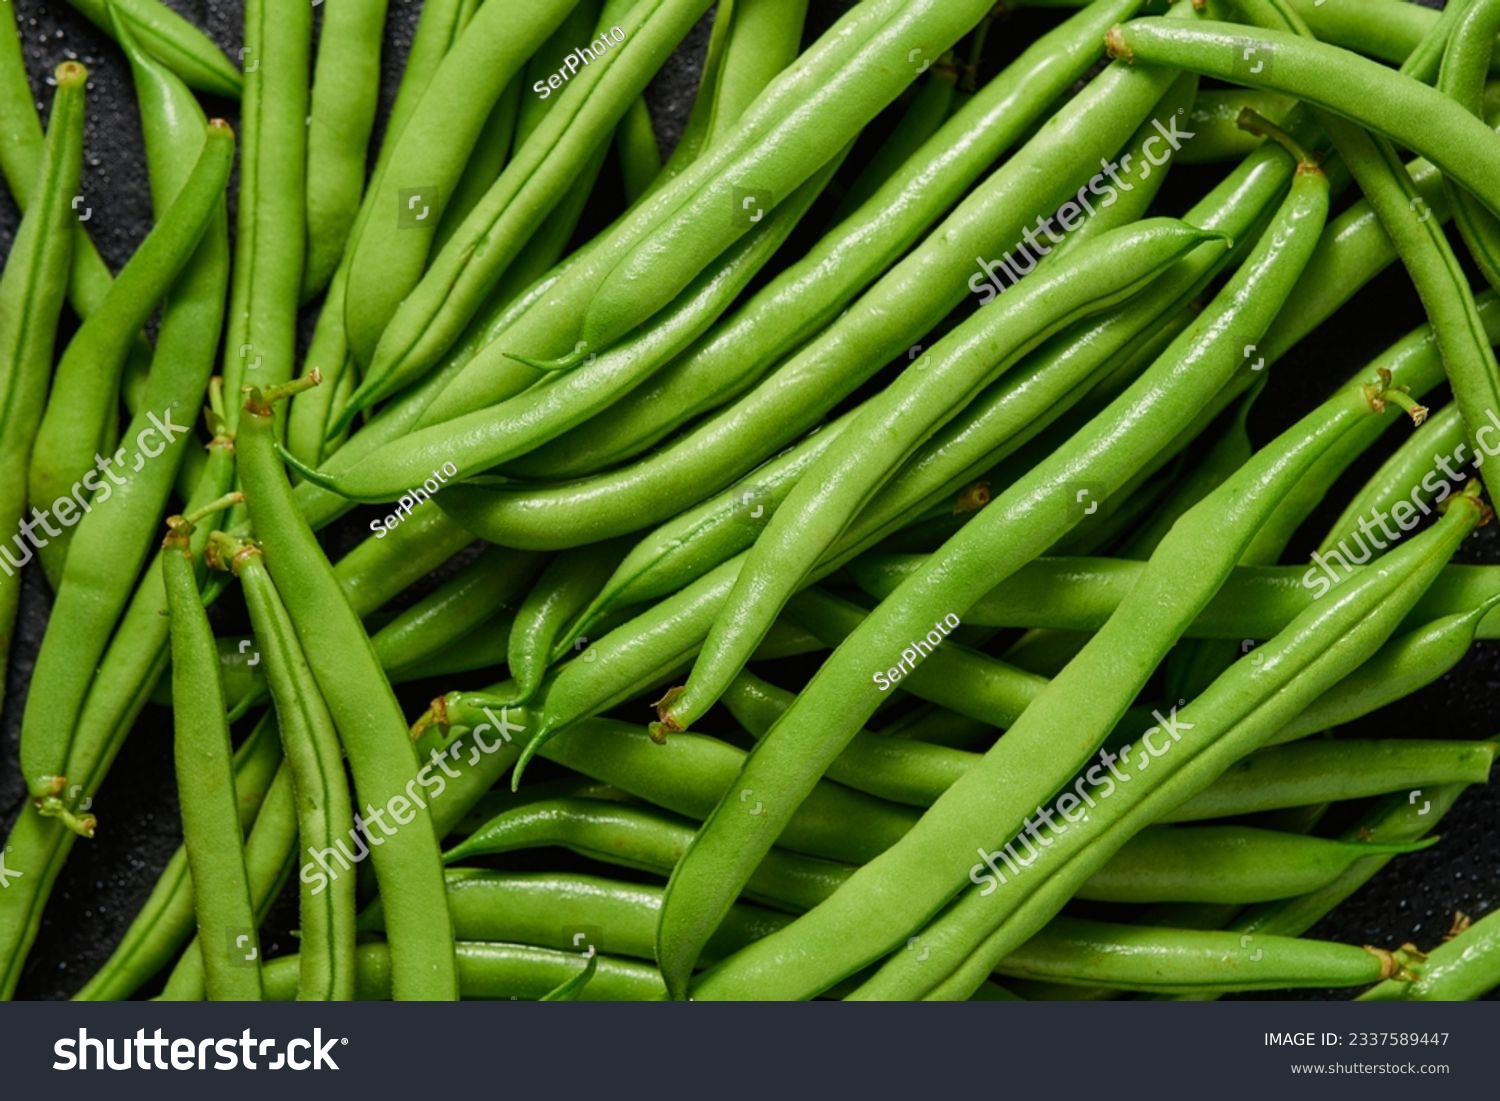 Heap of green pods of raw, not cooked, asparagus beans top view. #2337589447